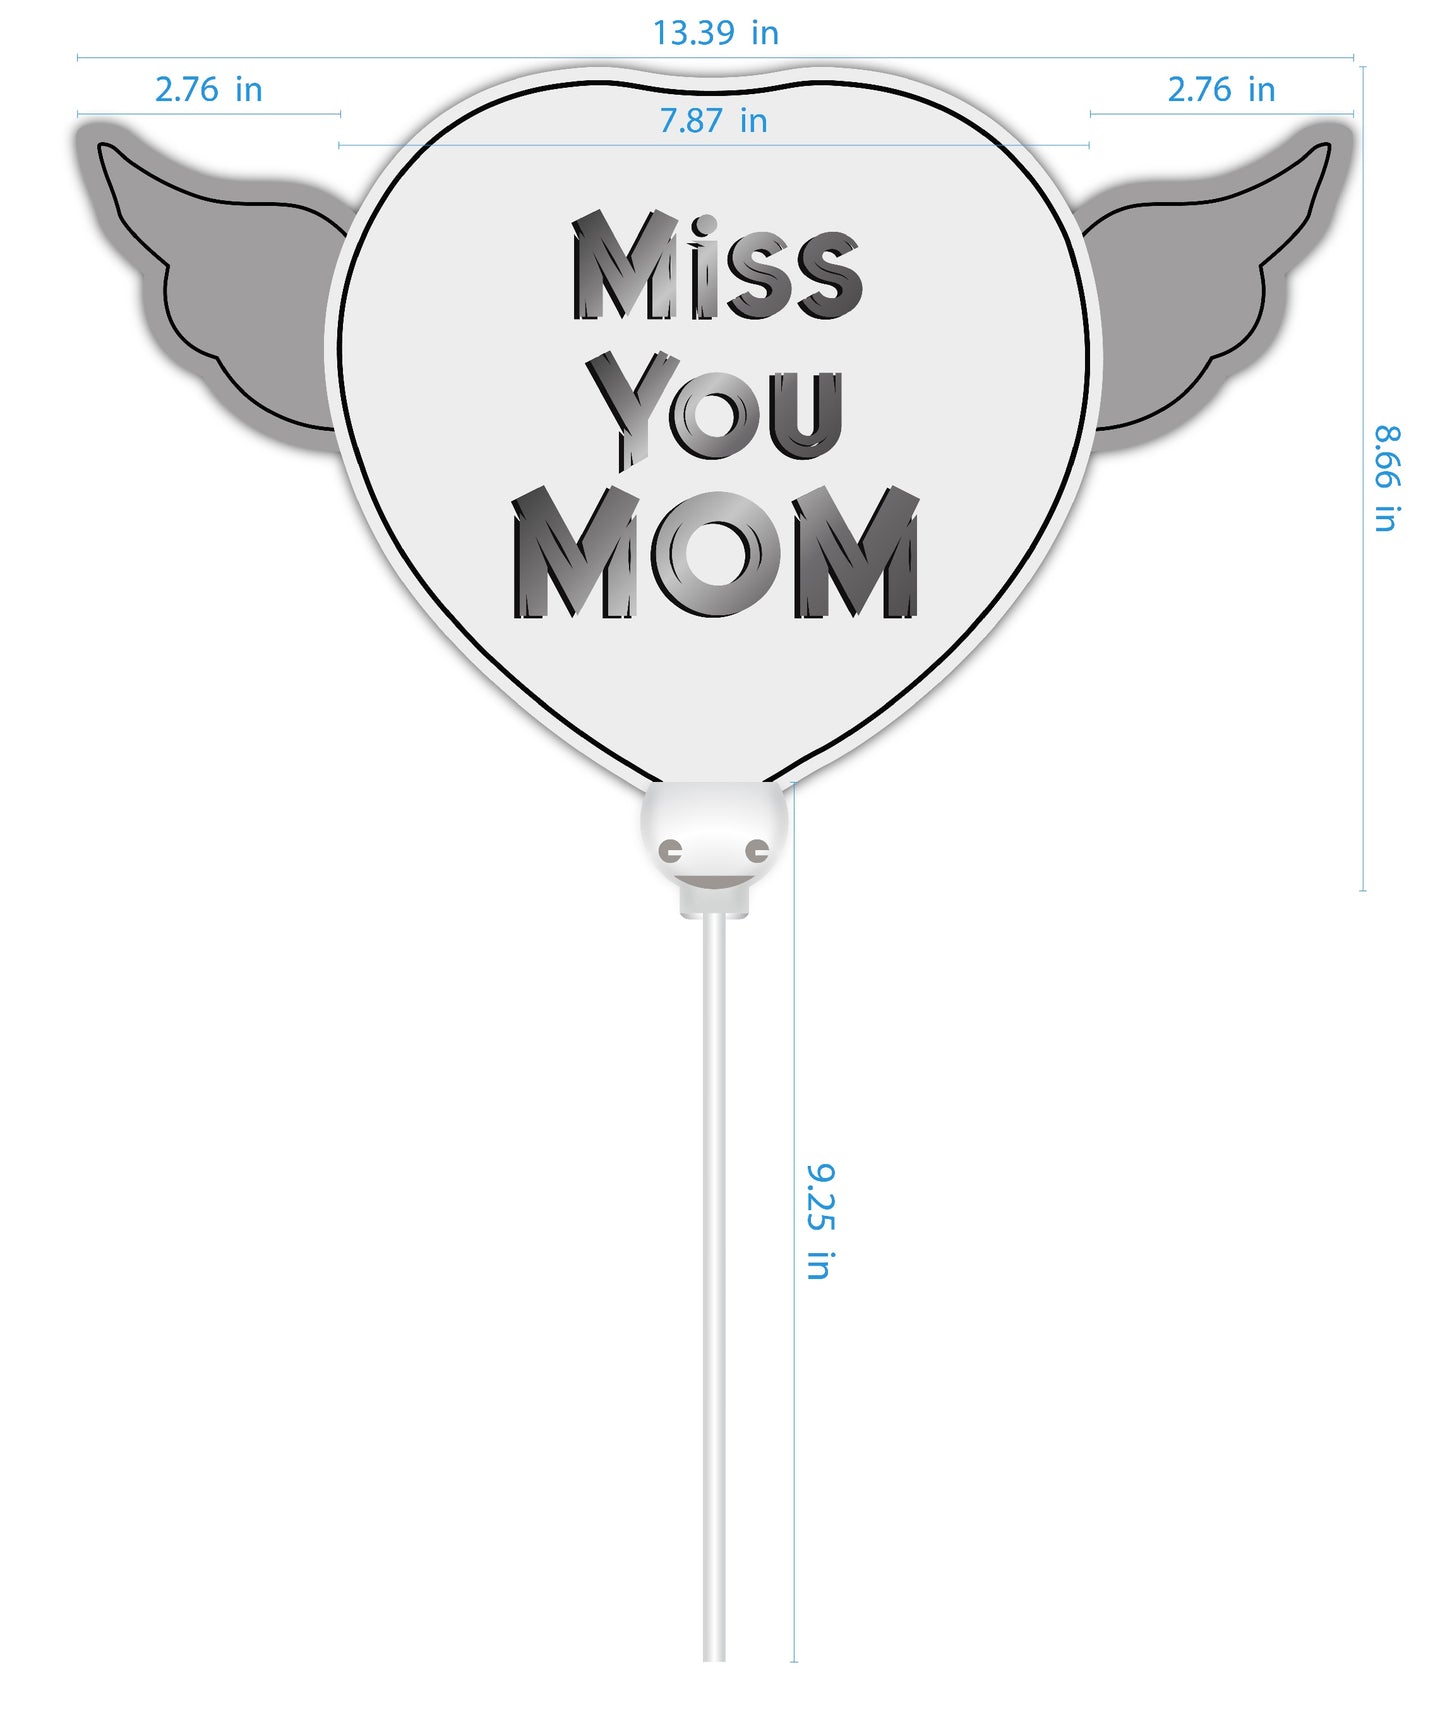 Heavenly Balloons ® on a Stick Miss You Mom (pink) balloon heart-shaped with angel wings dimensions